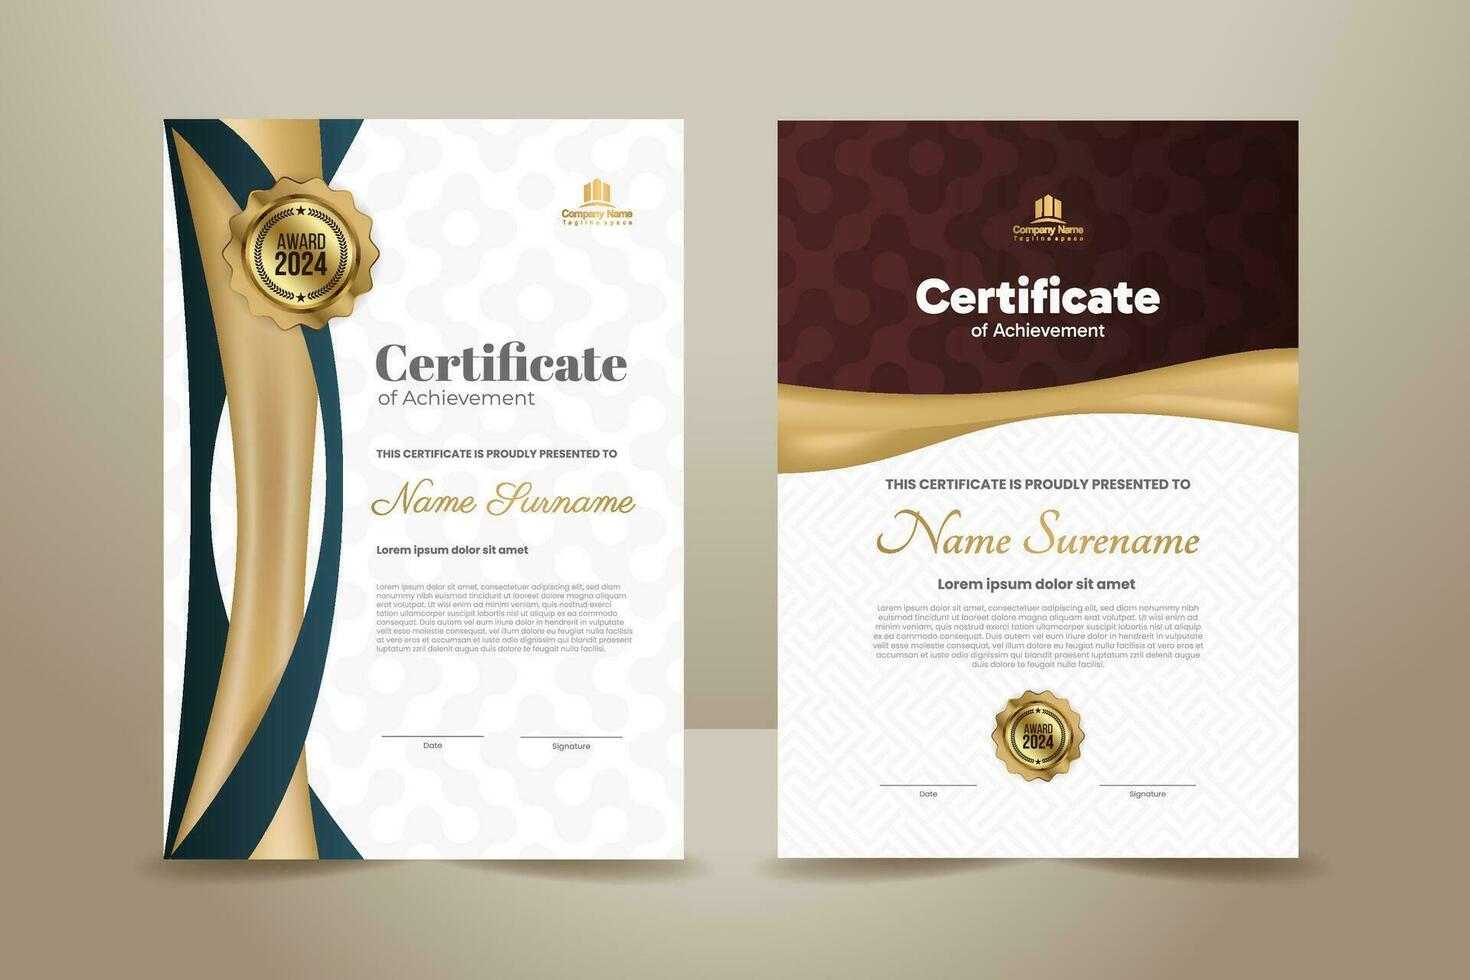 Luxury Elegant Premium Certificate Template Design with Blue, Red and Gold Ornament. Vector Illustration